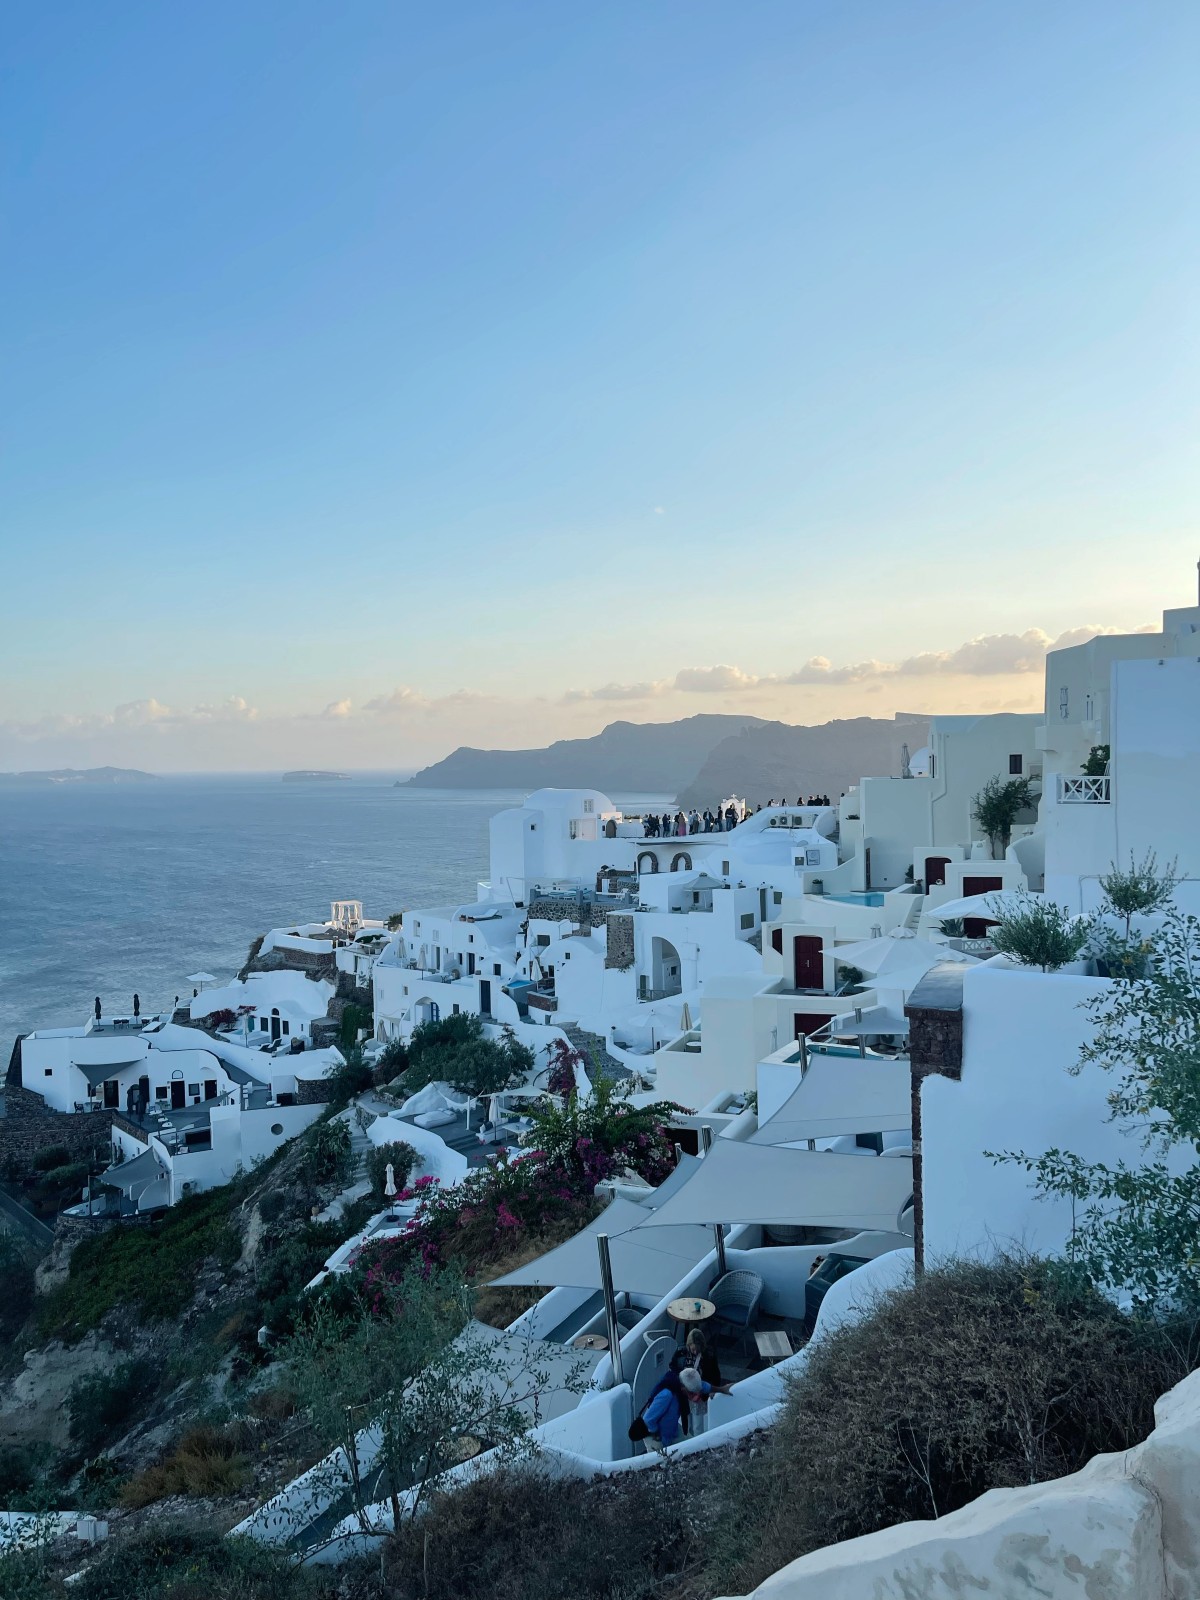 Santorini Travel Guide: What To See and Do In Santorini - Zanna Van Dijk